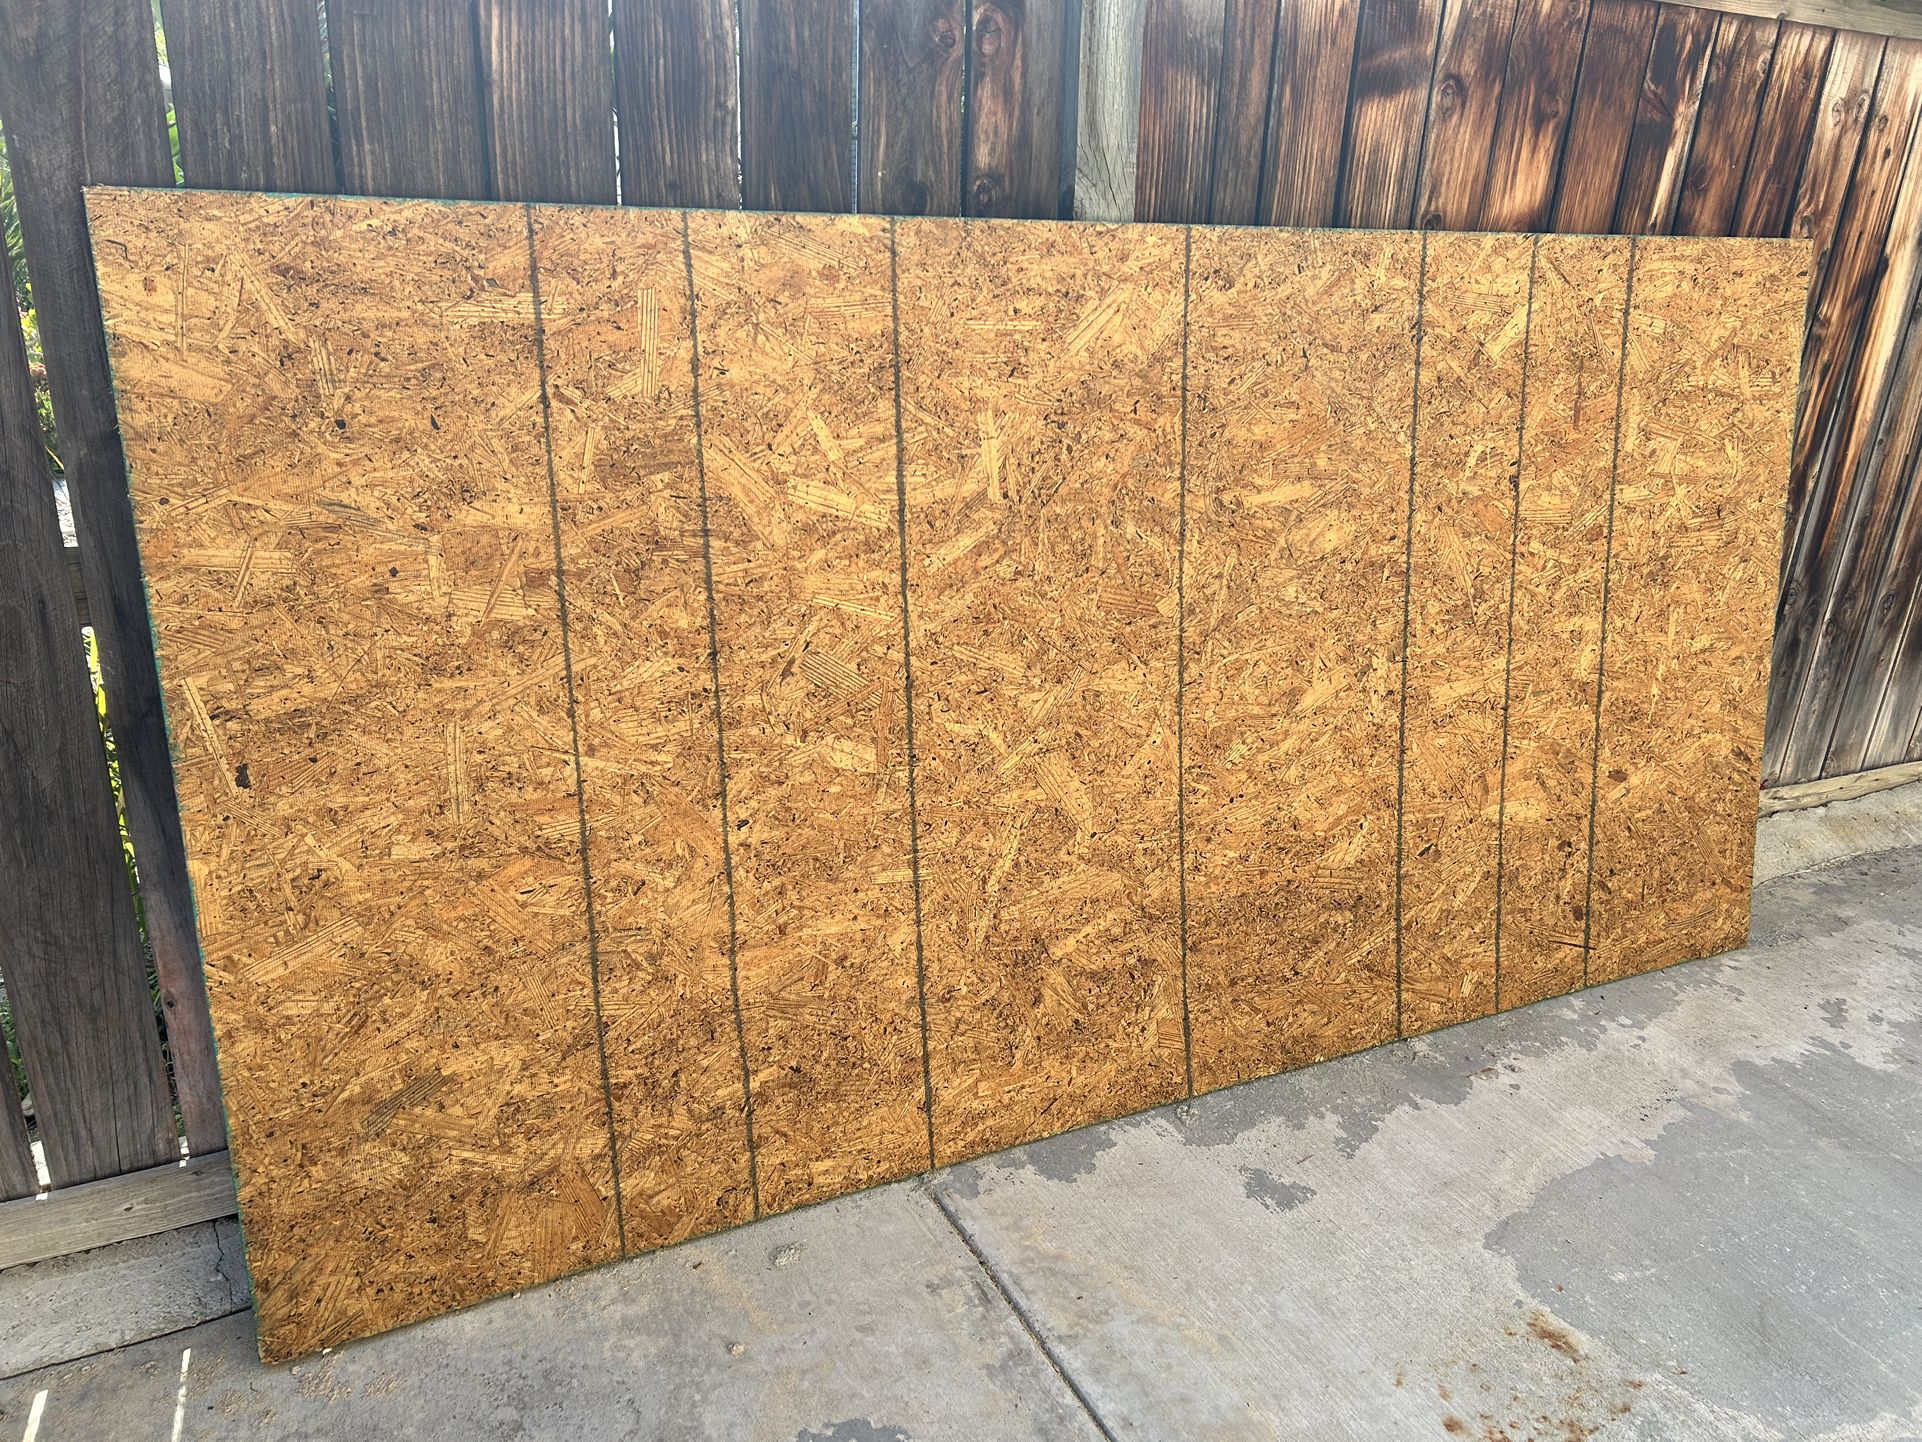 1 Sheet Of Radiant Barrier Plywood 15/32 4x8